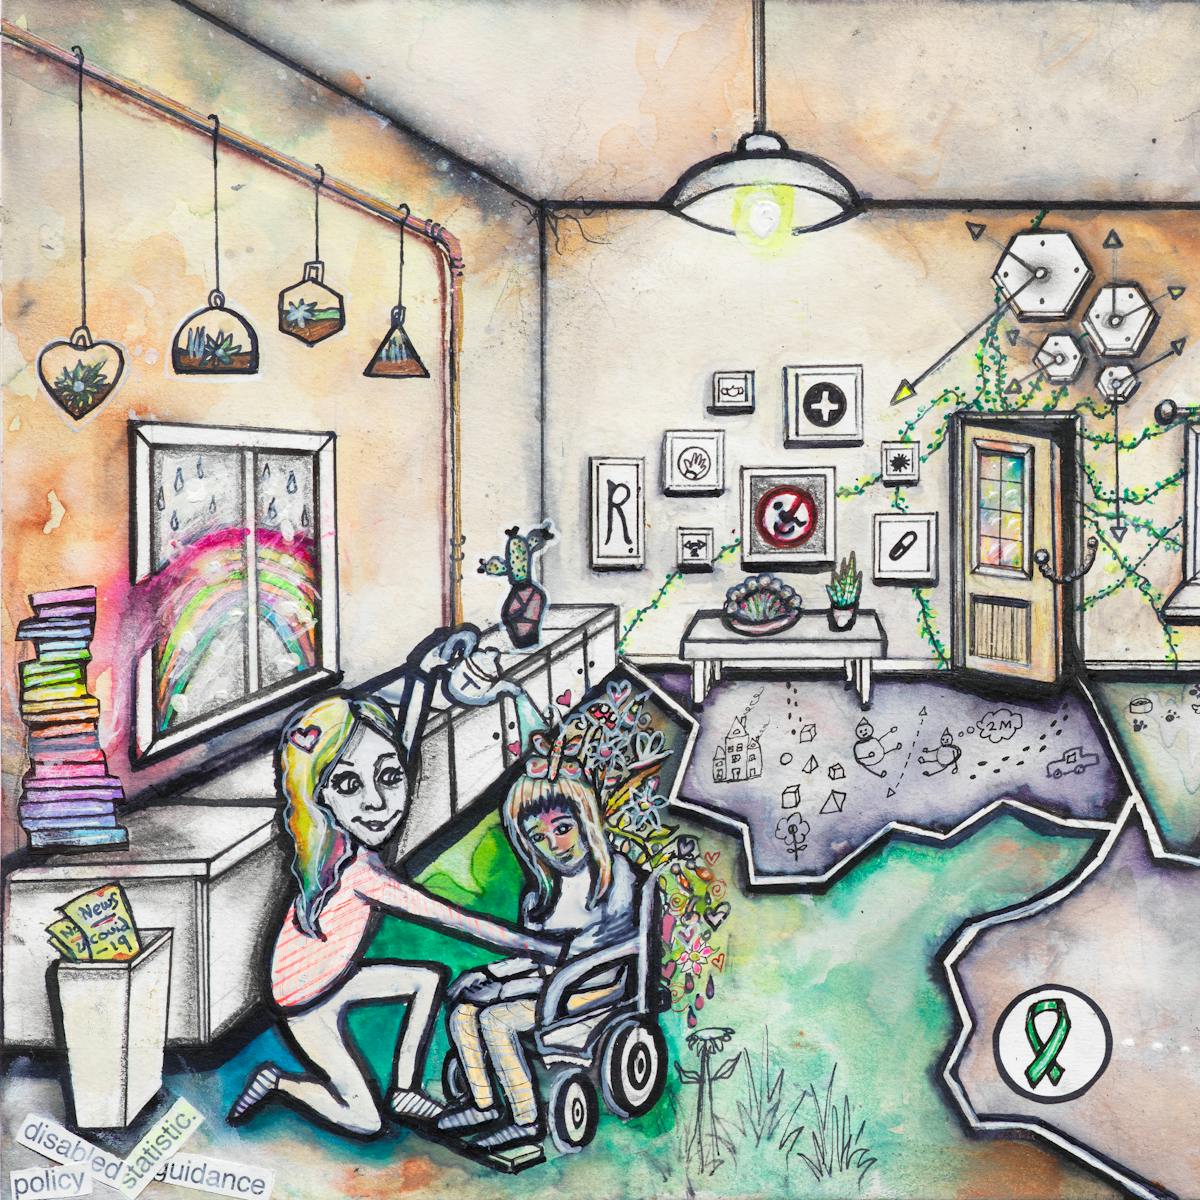 Artwork using watercolour and ink incorporating some collaged words. The artwork shows a busy multi-coloured living room scene separated by jagged white lines drawn across the floor like cracks. In the left hand corner of the room, a girl sits in a wheelchair while a smiling woman with rainbow hair pours liquid from a teapot over her head from which butterflies, flowers and hearts emerge. Behind them are a pile of rainbow coloured books, and a window through which a rainbow can be seen. Along the back wall are various pictures containing images such as: a no access sign with a wheelchair within it, a first aid symbol, a corona virus, and a capital ‘R’. A security chain is holding a front door ajar from which plants creep into the room and across the walls. Outside a window, the corona virus can be seen. In the front right corner of the scene, a small man wearing a tie sits in lotus position in front of a laptop surrounded by cups of tea, crumpled paper, and a chair on its side. Above his head are symbols in circles such as a check mark, a pencil, and a smiley face joined by dotted lines. A green ribbon, the symbol for mental health awareness, appears in another circle in the centre of the room.